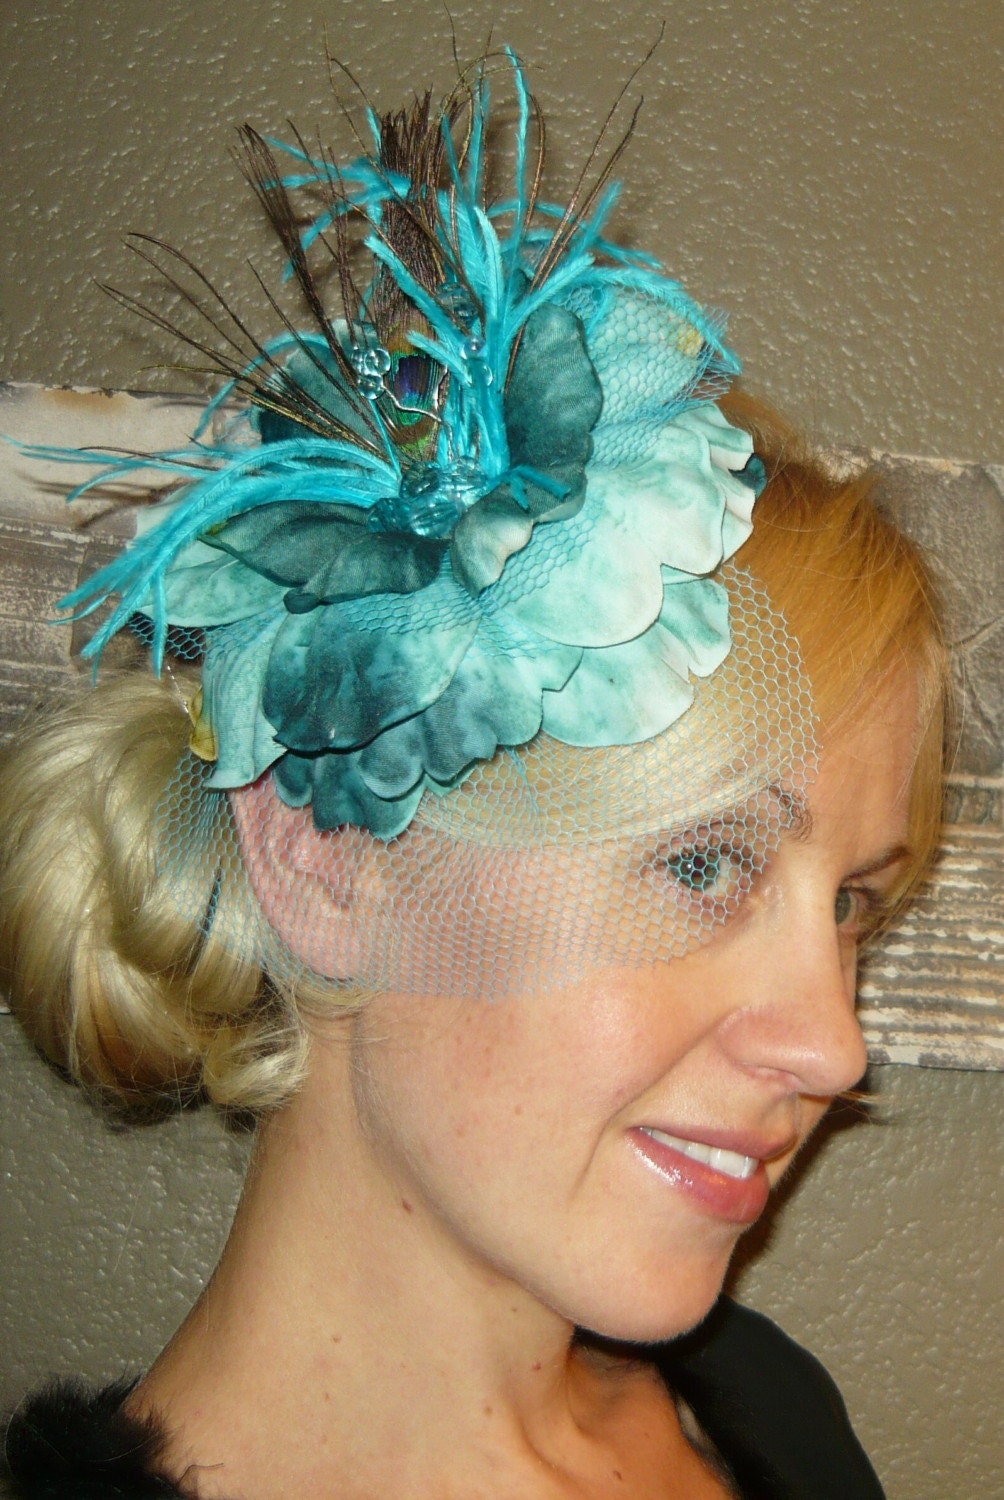 Aqua Flower Fascinator comb or hair clip with Peacock Feathers by starzselection